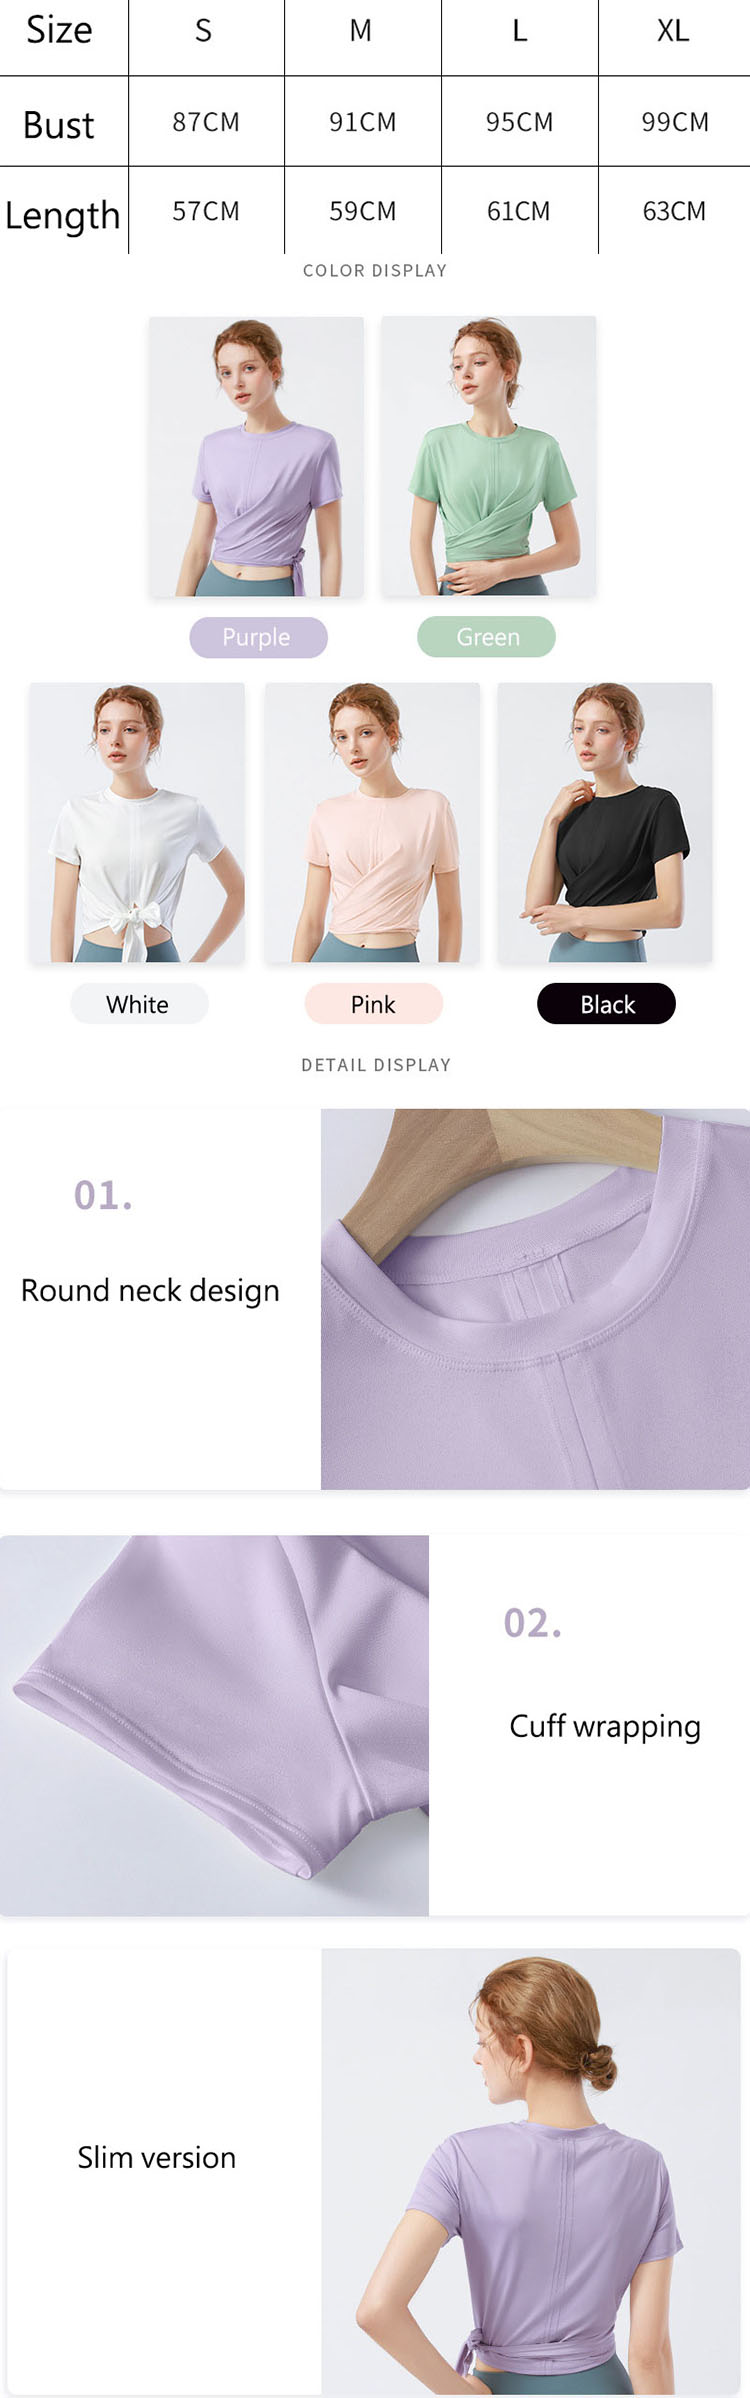 The severity of mature women's clothes is neutralized by the best golf shirts with an X-shaped combination